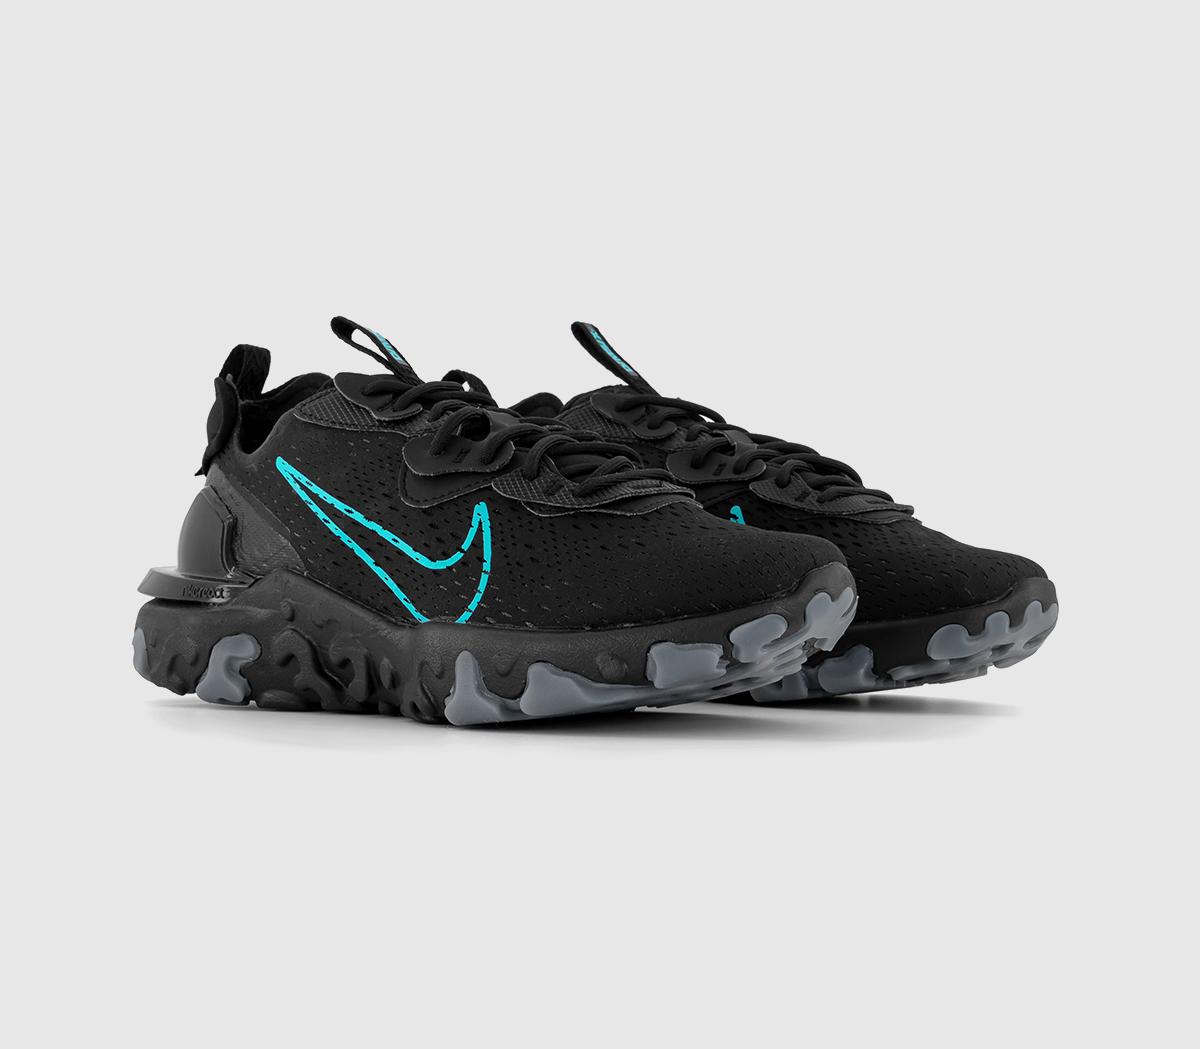 Nike React Vision Trainers Black Dusty Cactus Cool Grey, 7